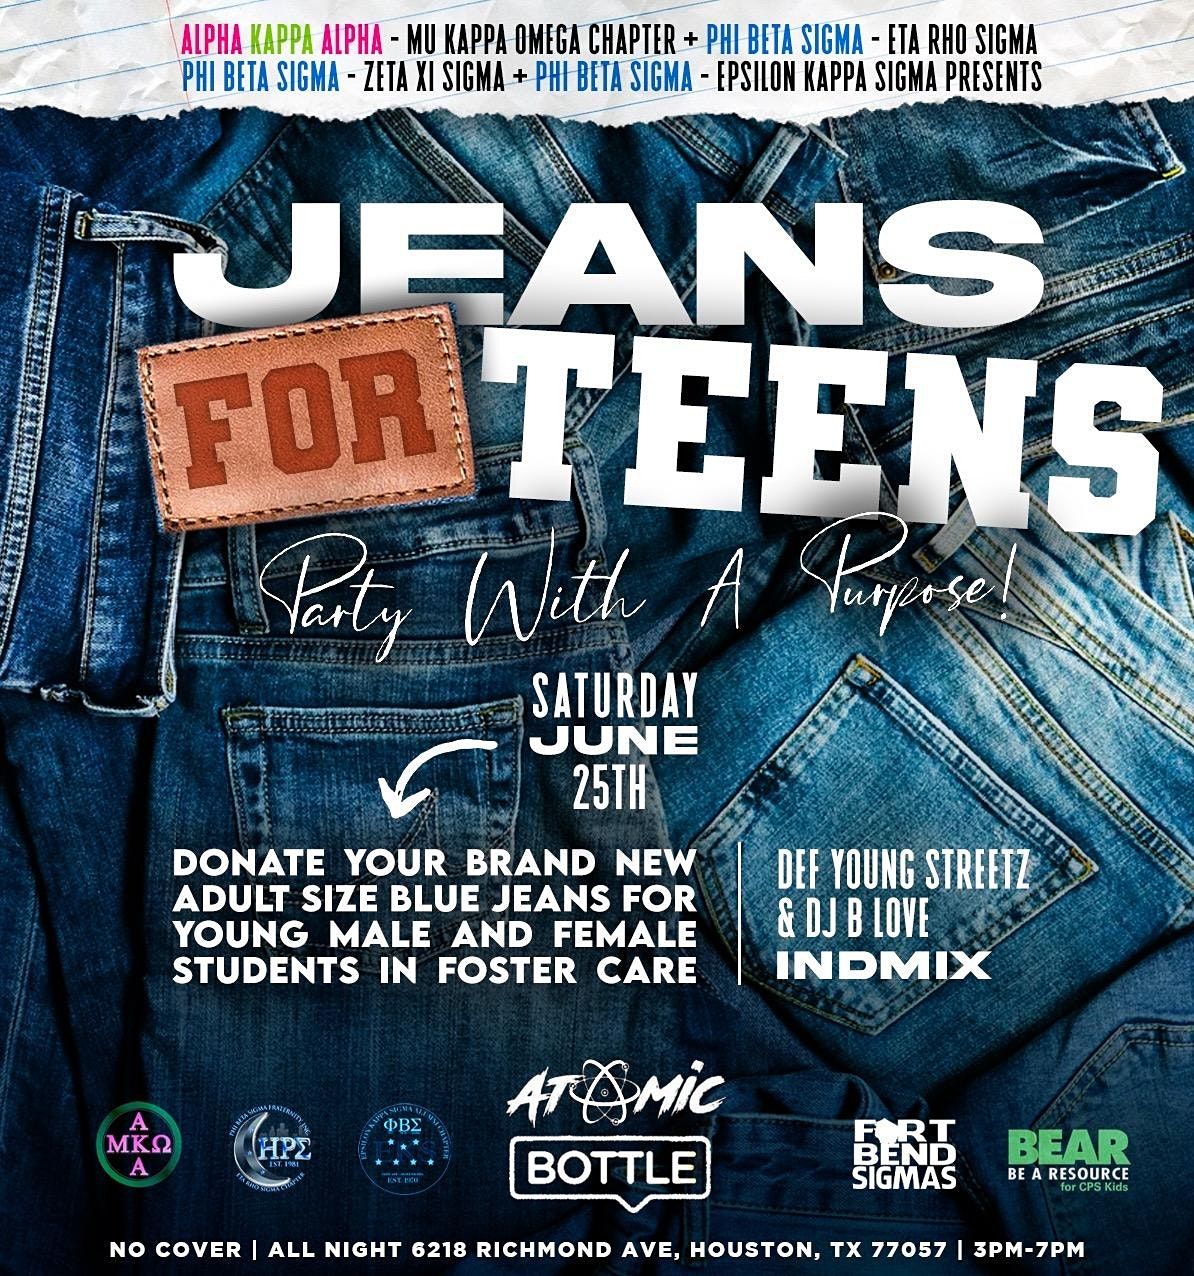 JEANS for TEENS - Saturday June 25th